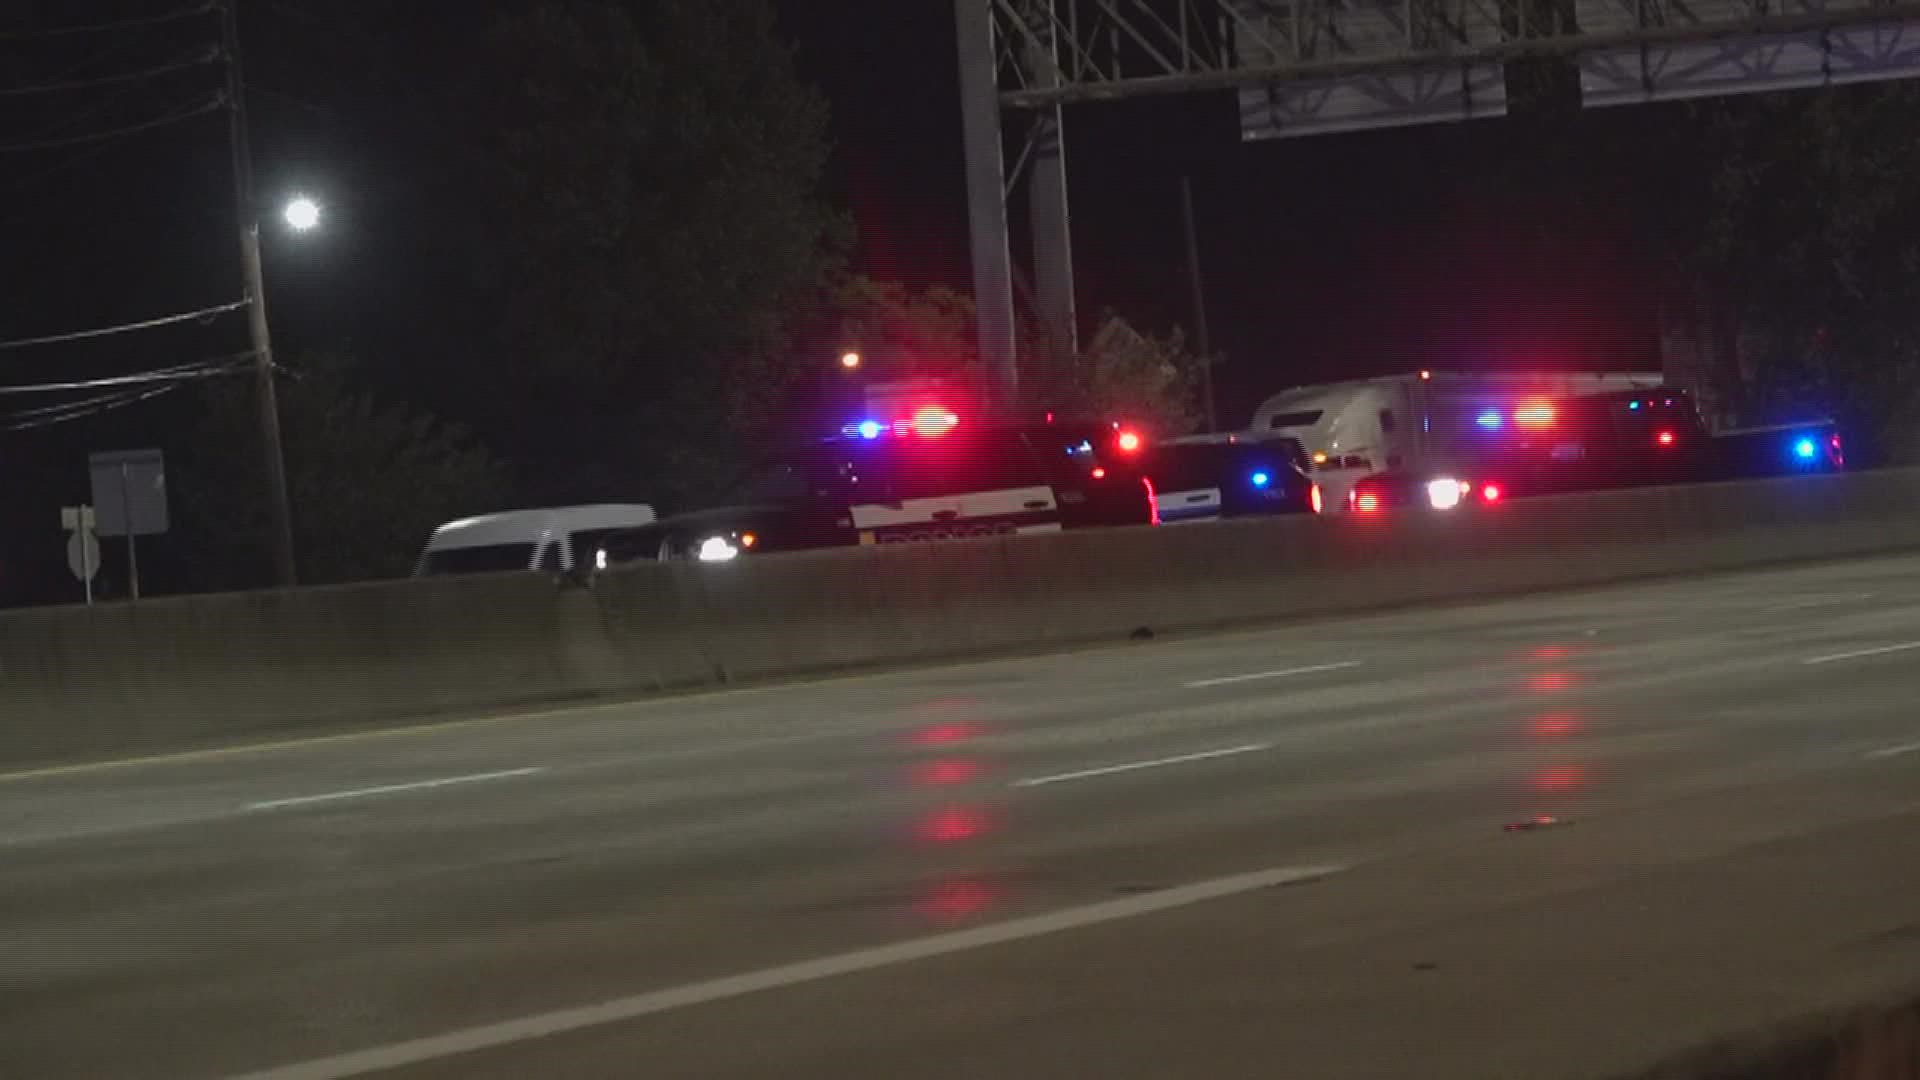 The man struck while trying to cross the interstate has been identified as Kelly June Grogan, 51, of Beaumont.